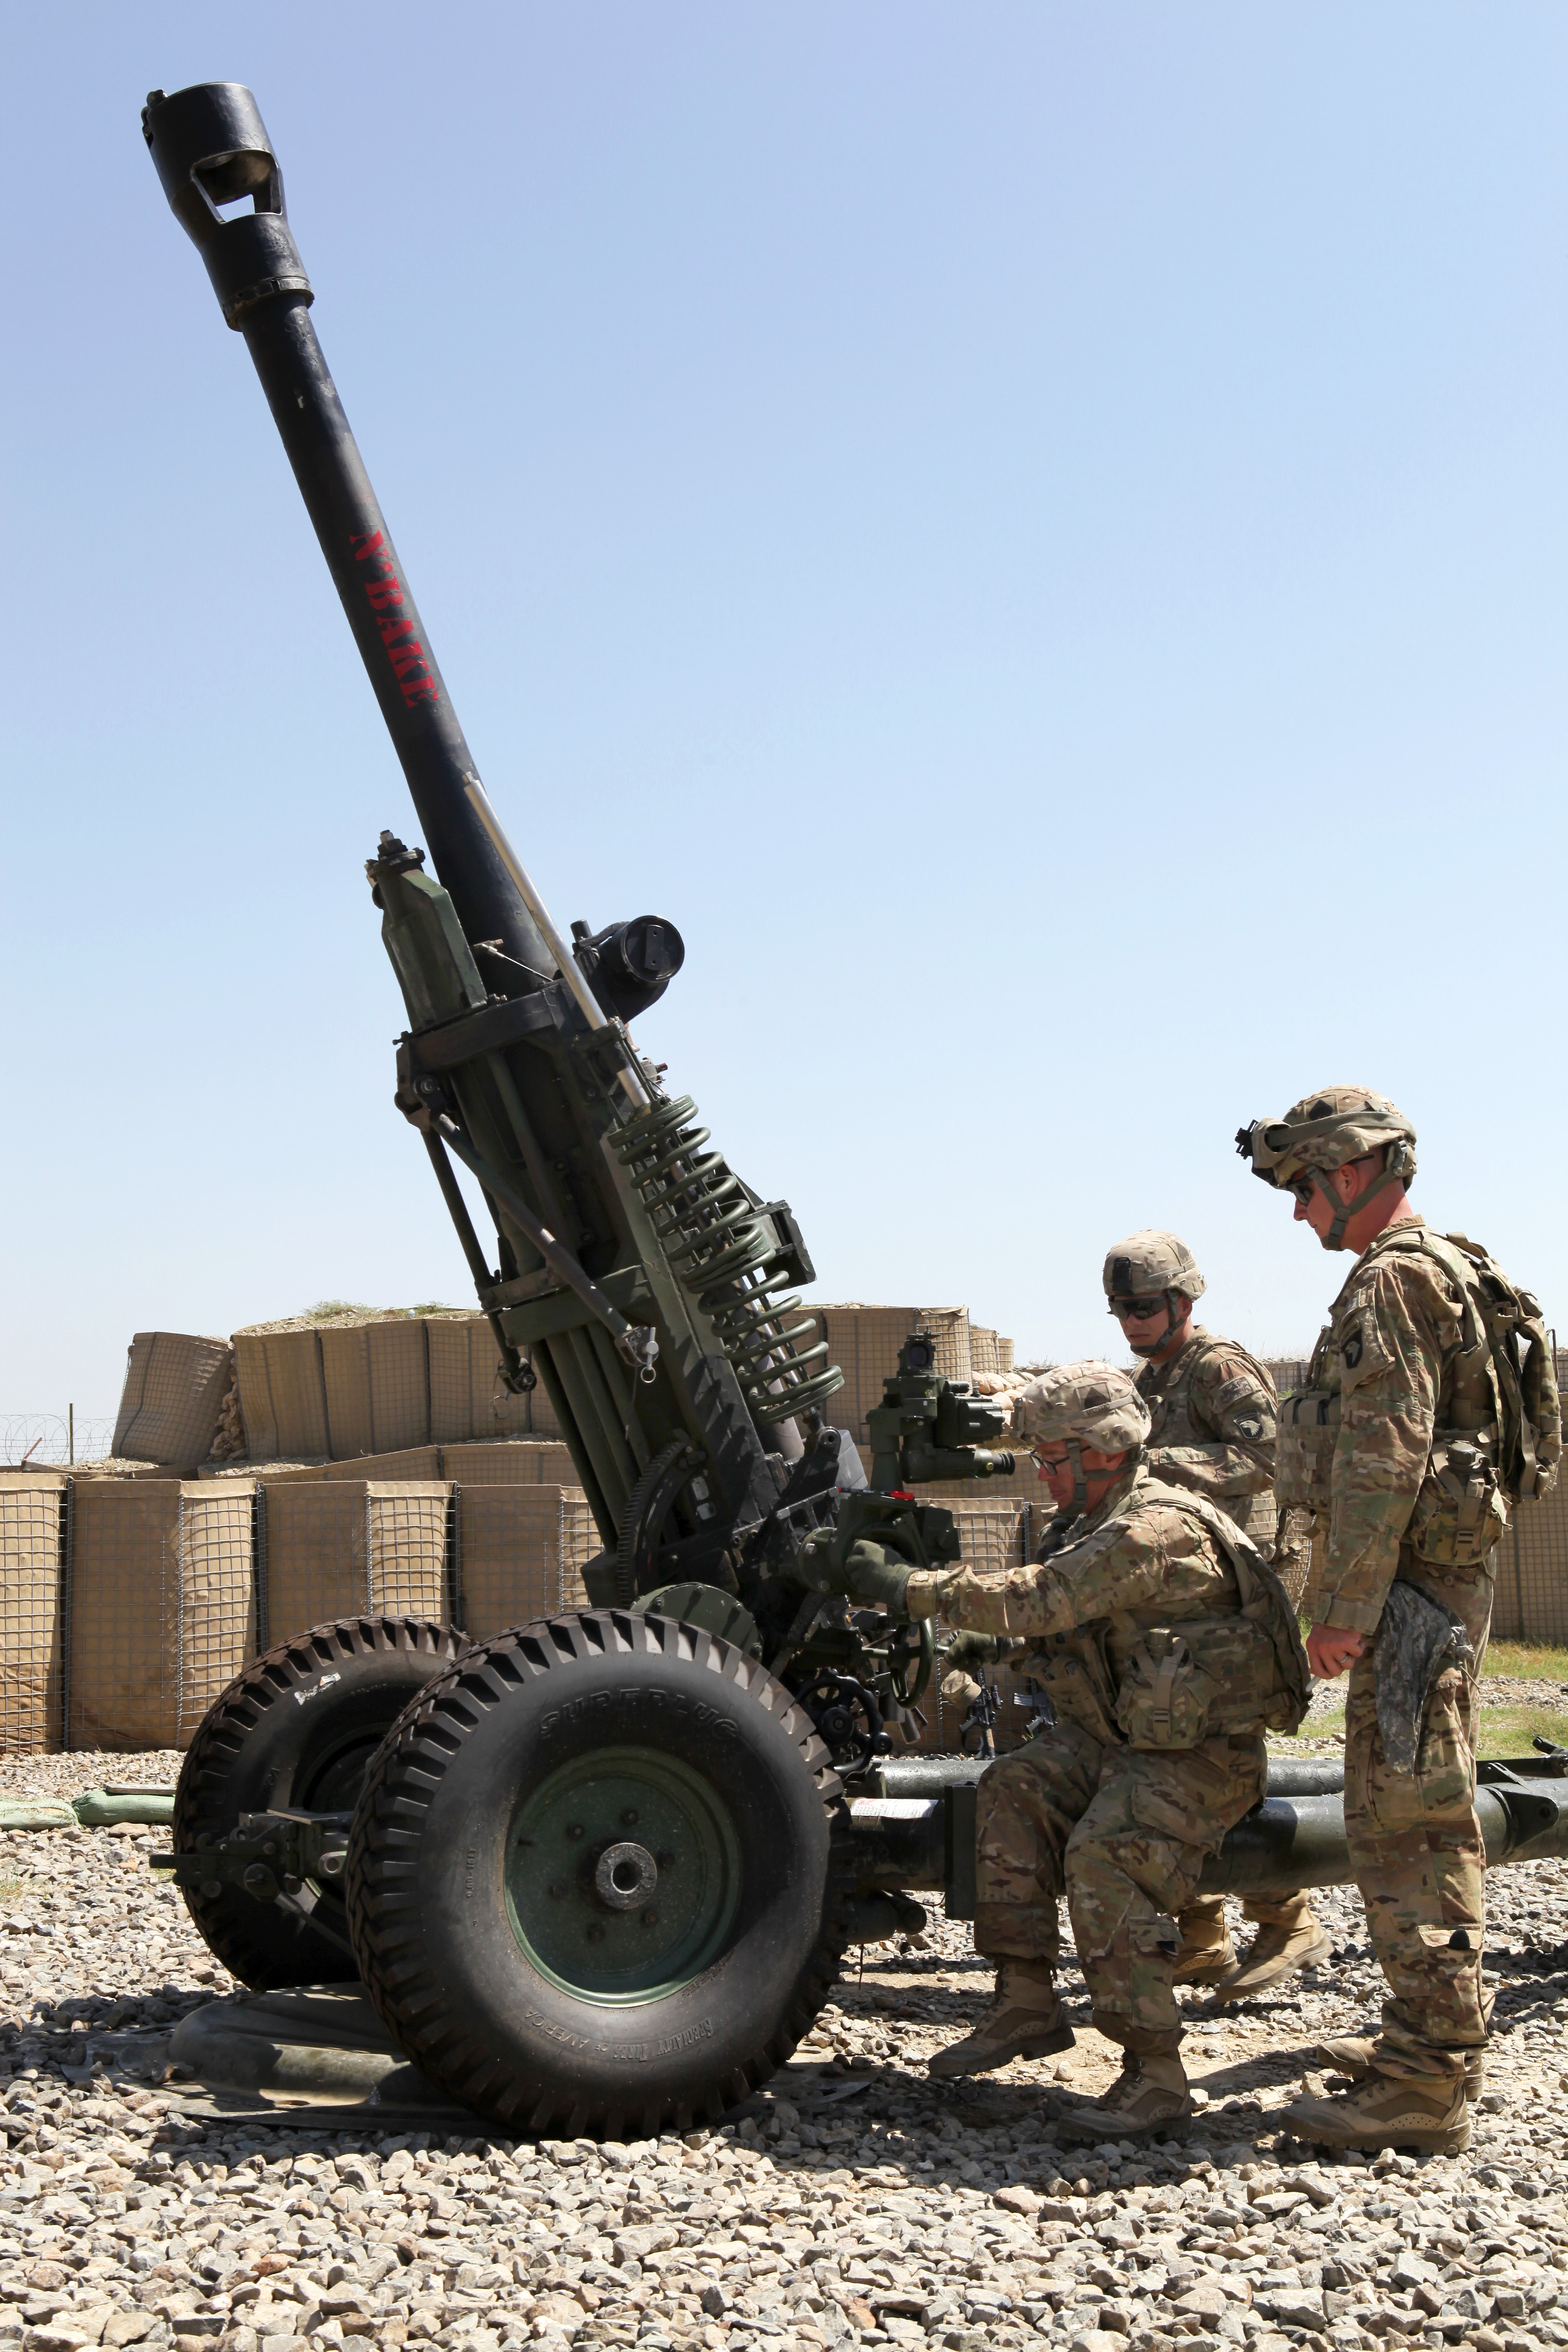 U.S. soldiers perform a high fire drill on M119A 105mm howitzer during the Guns of Glory top gun competition on Combat Outpost Chamkani in Khost province, Afghanistan, Sept. 4, 2013.